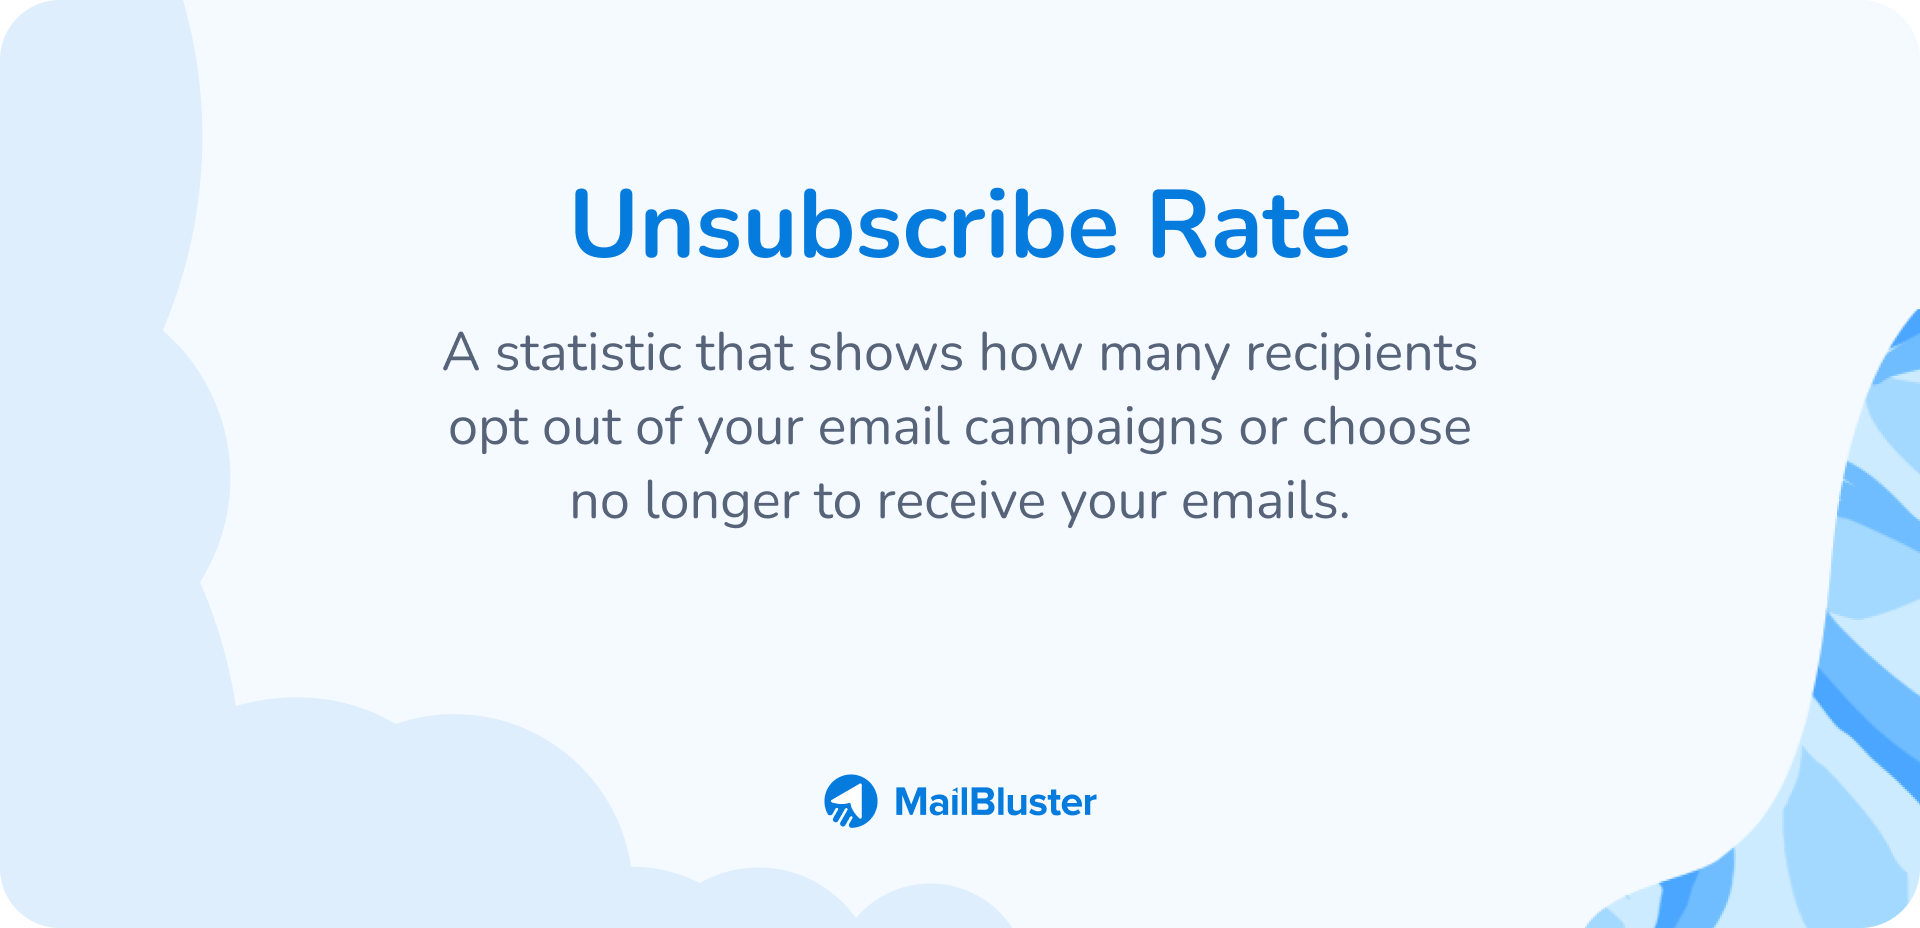 Unsubscribe rate definition.(What is unsubscribe rate?).